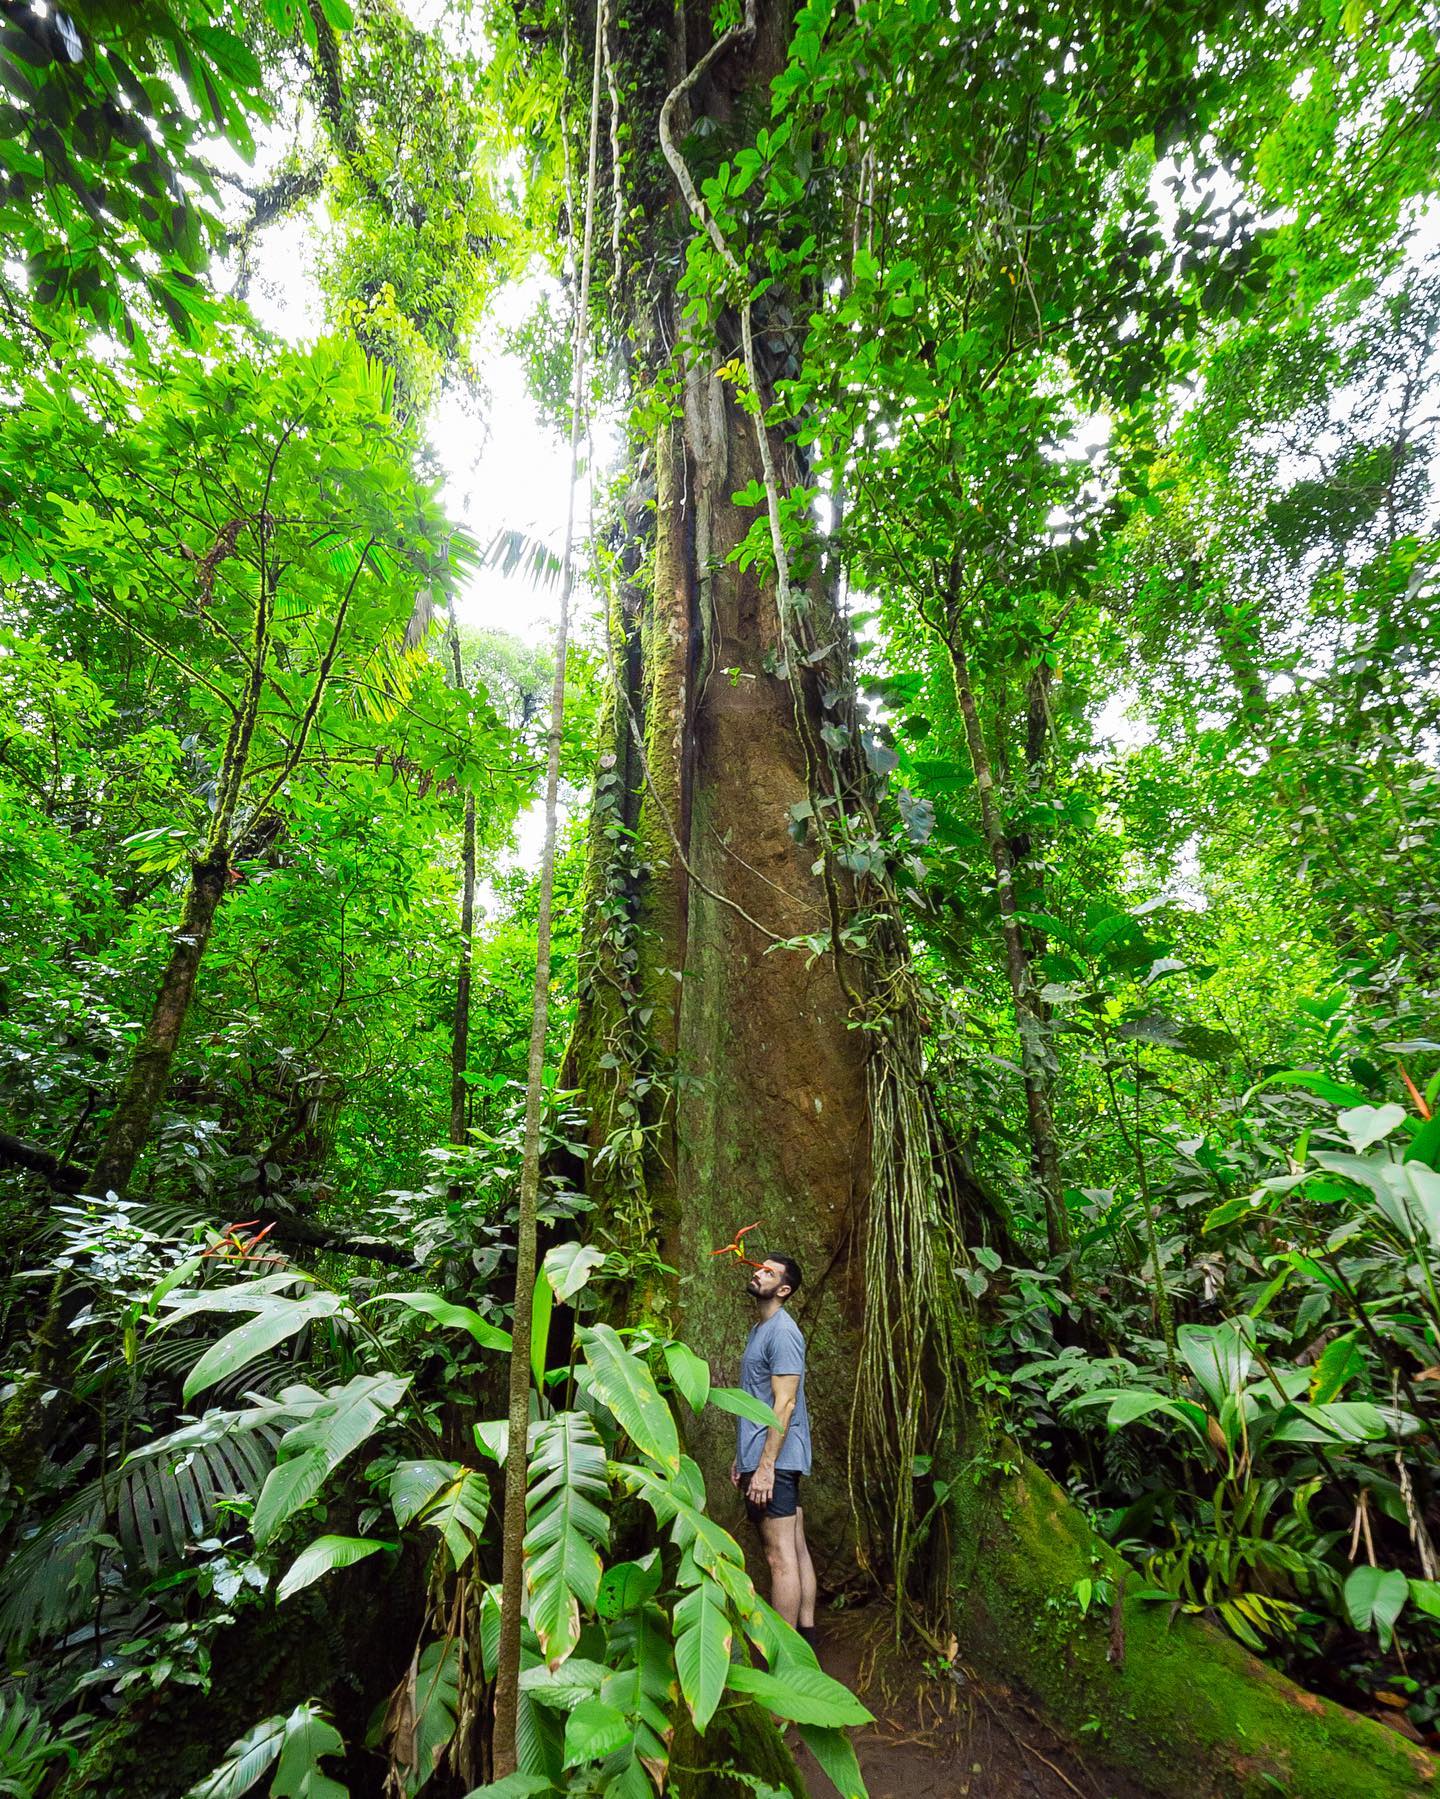 National Tree Day is celebrated in Costa Rica on June 15th! This celebration was established to create awareness on the necessity to protect forest areas!
.
Join us and learn more about the magical trees that we protect in Sensoria! Book today at sensoria.cr or reserve directly via WhatsApp at +506 8955-4971.
.
#experiencesensoria
.
#trees #treehugger #visitcostarica #thisiscostarica #travel #tourism #wonder #love #traveling #tour #costarica #sustainabletourism #sustainability #vacation #photooftheday #blueriver #waterfall #chasingwaterfalls #beauty #thermalspring #picoftheday #photooftheday #happiness #hiking #forest #rincondelavieja